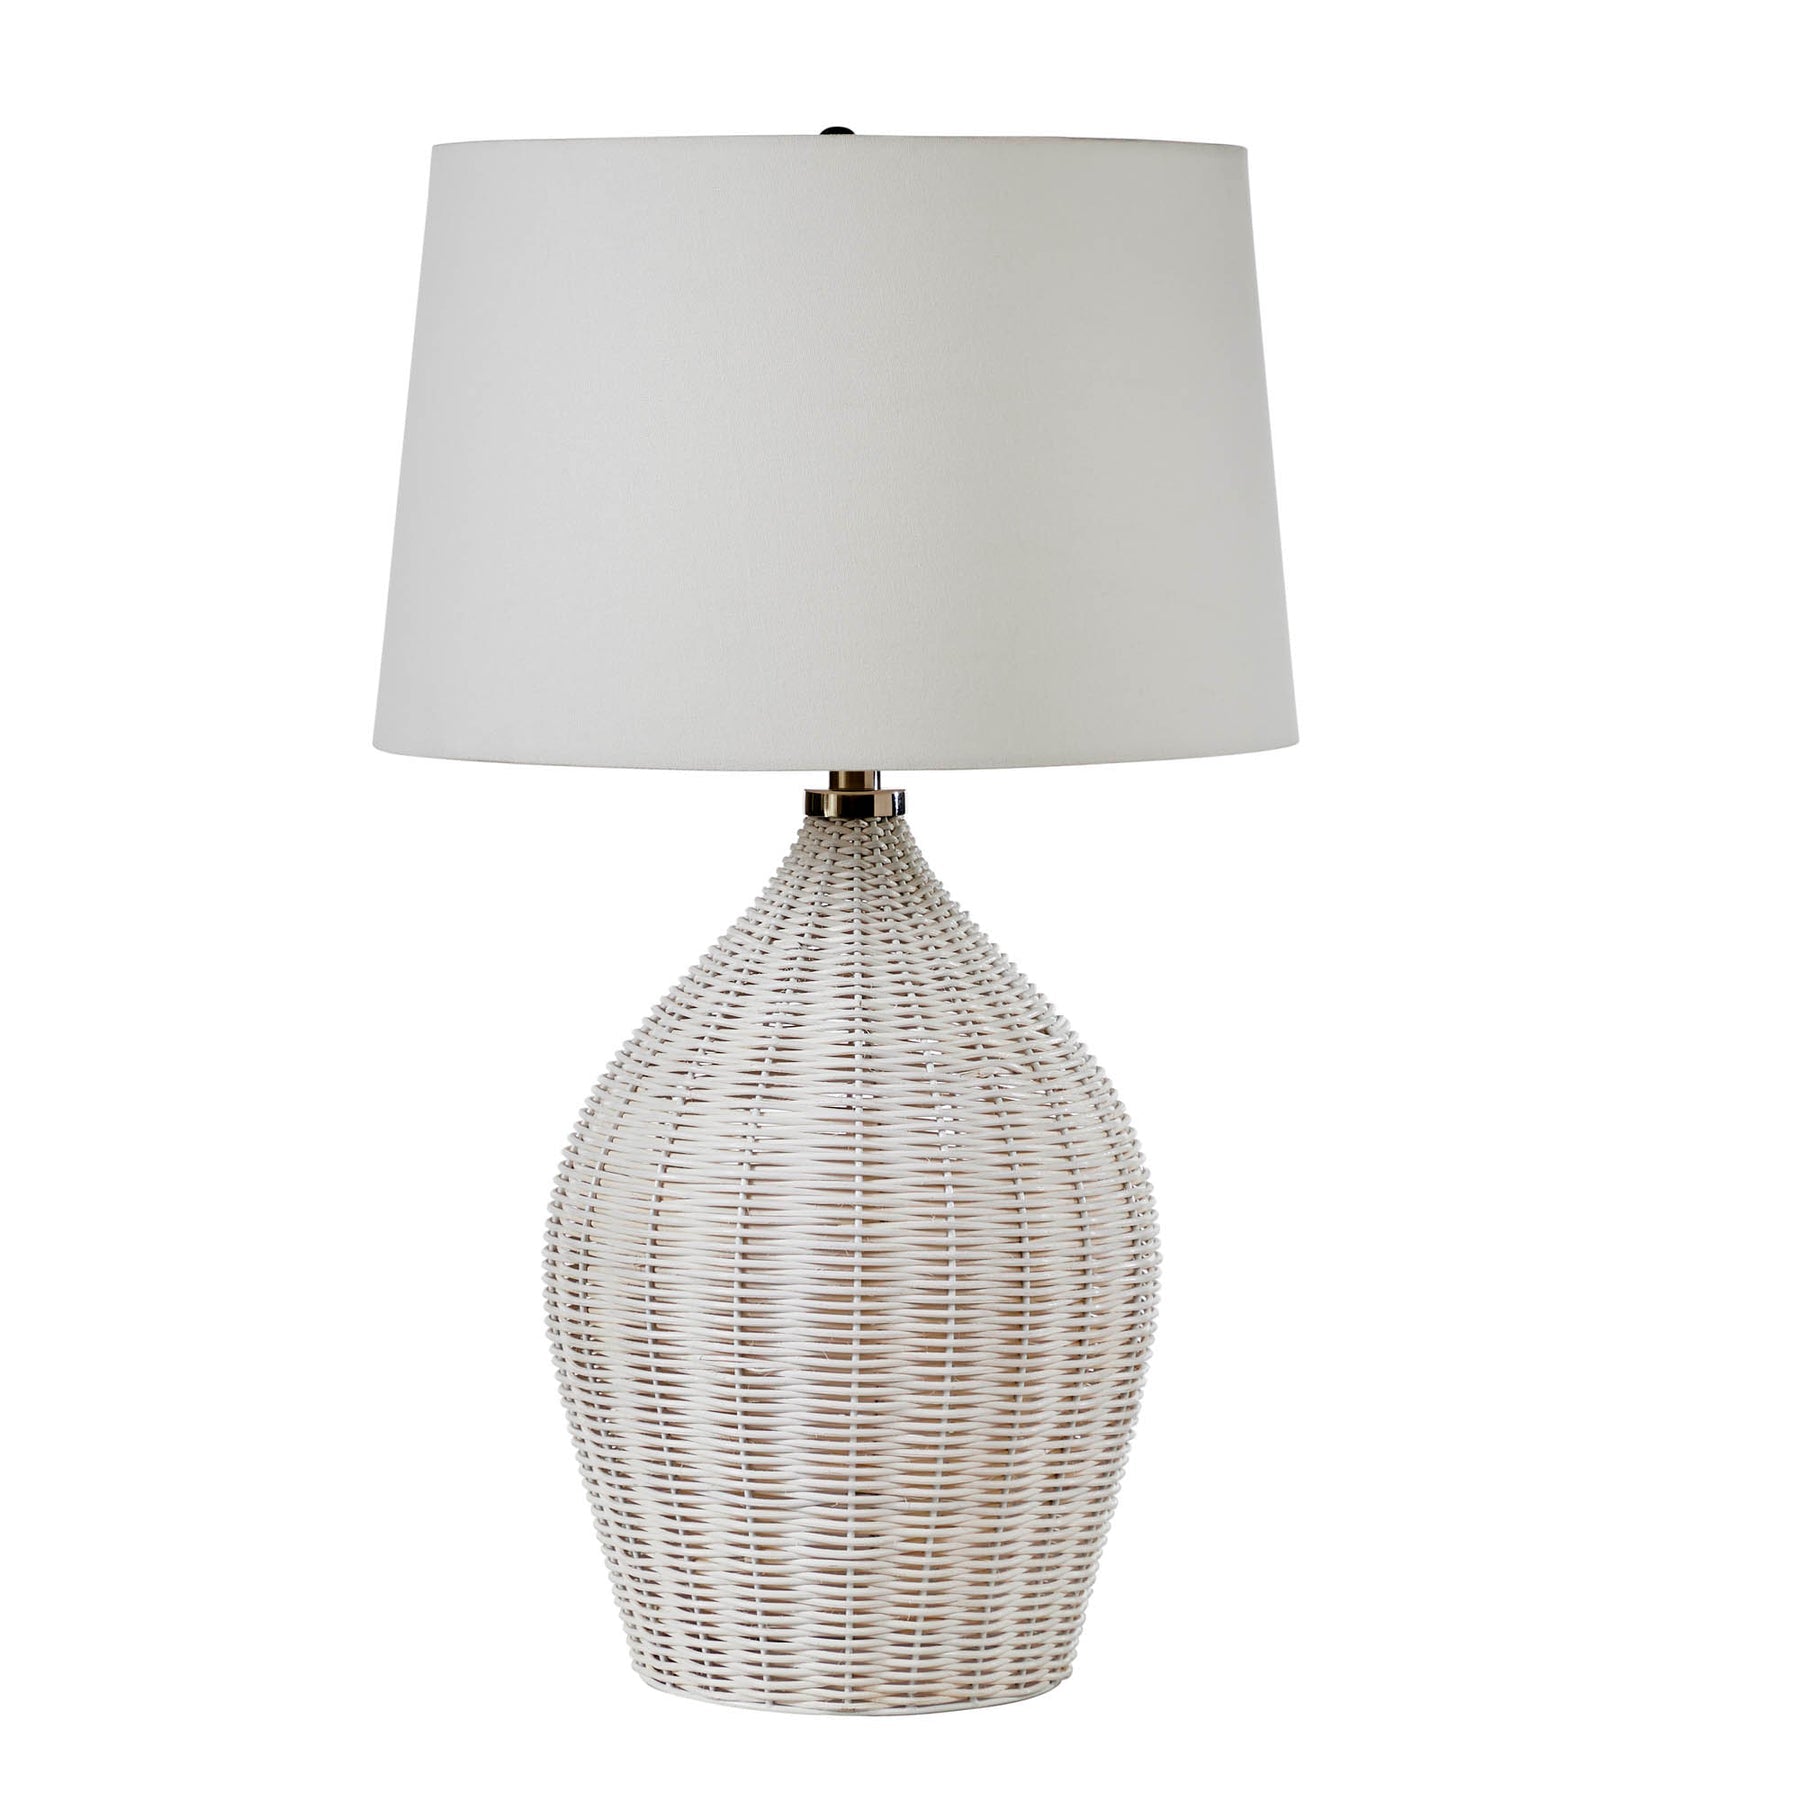 White Washed Rattan Lamp